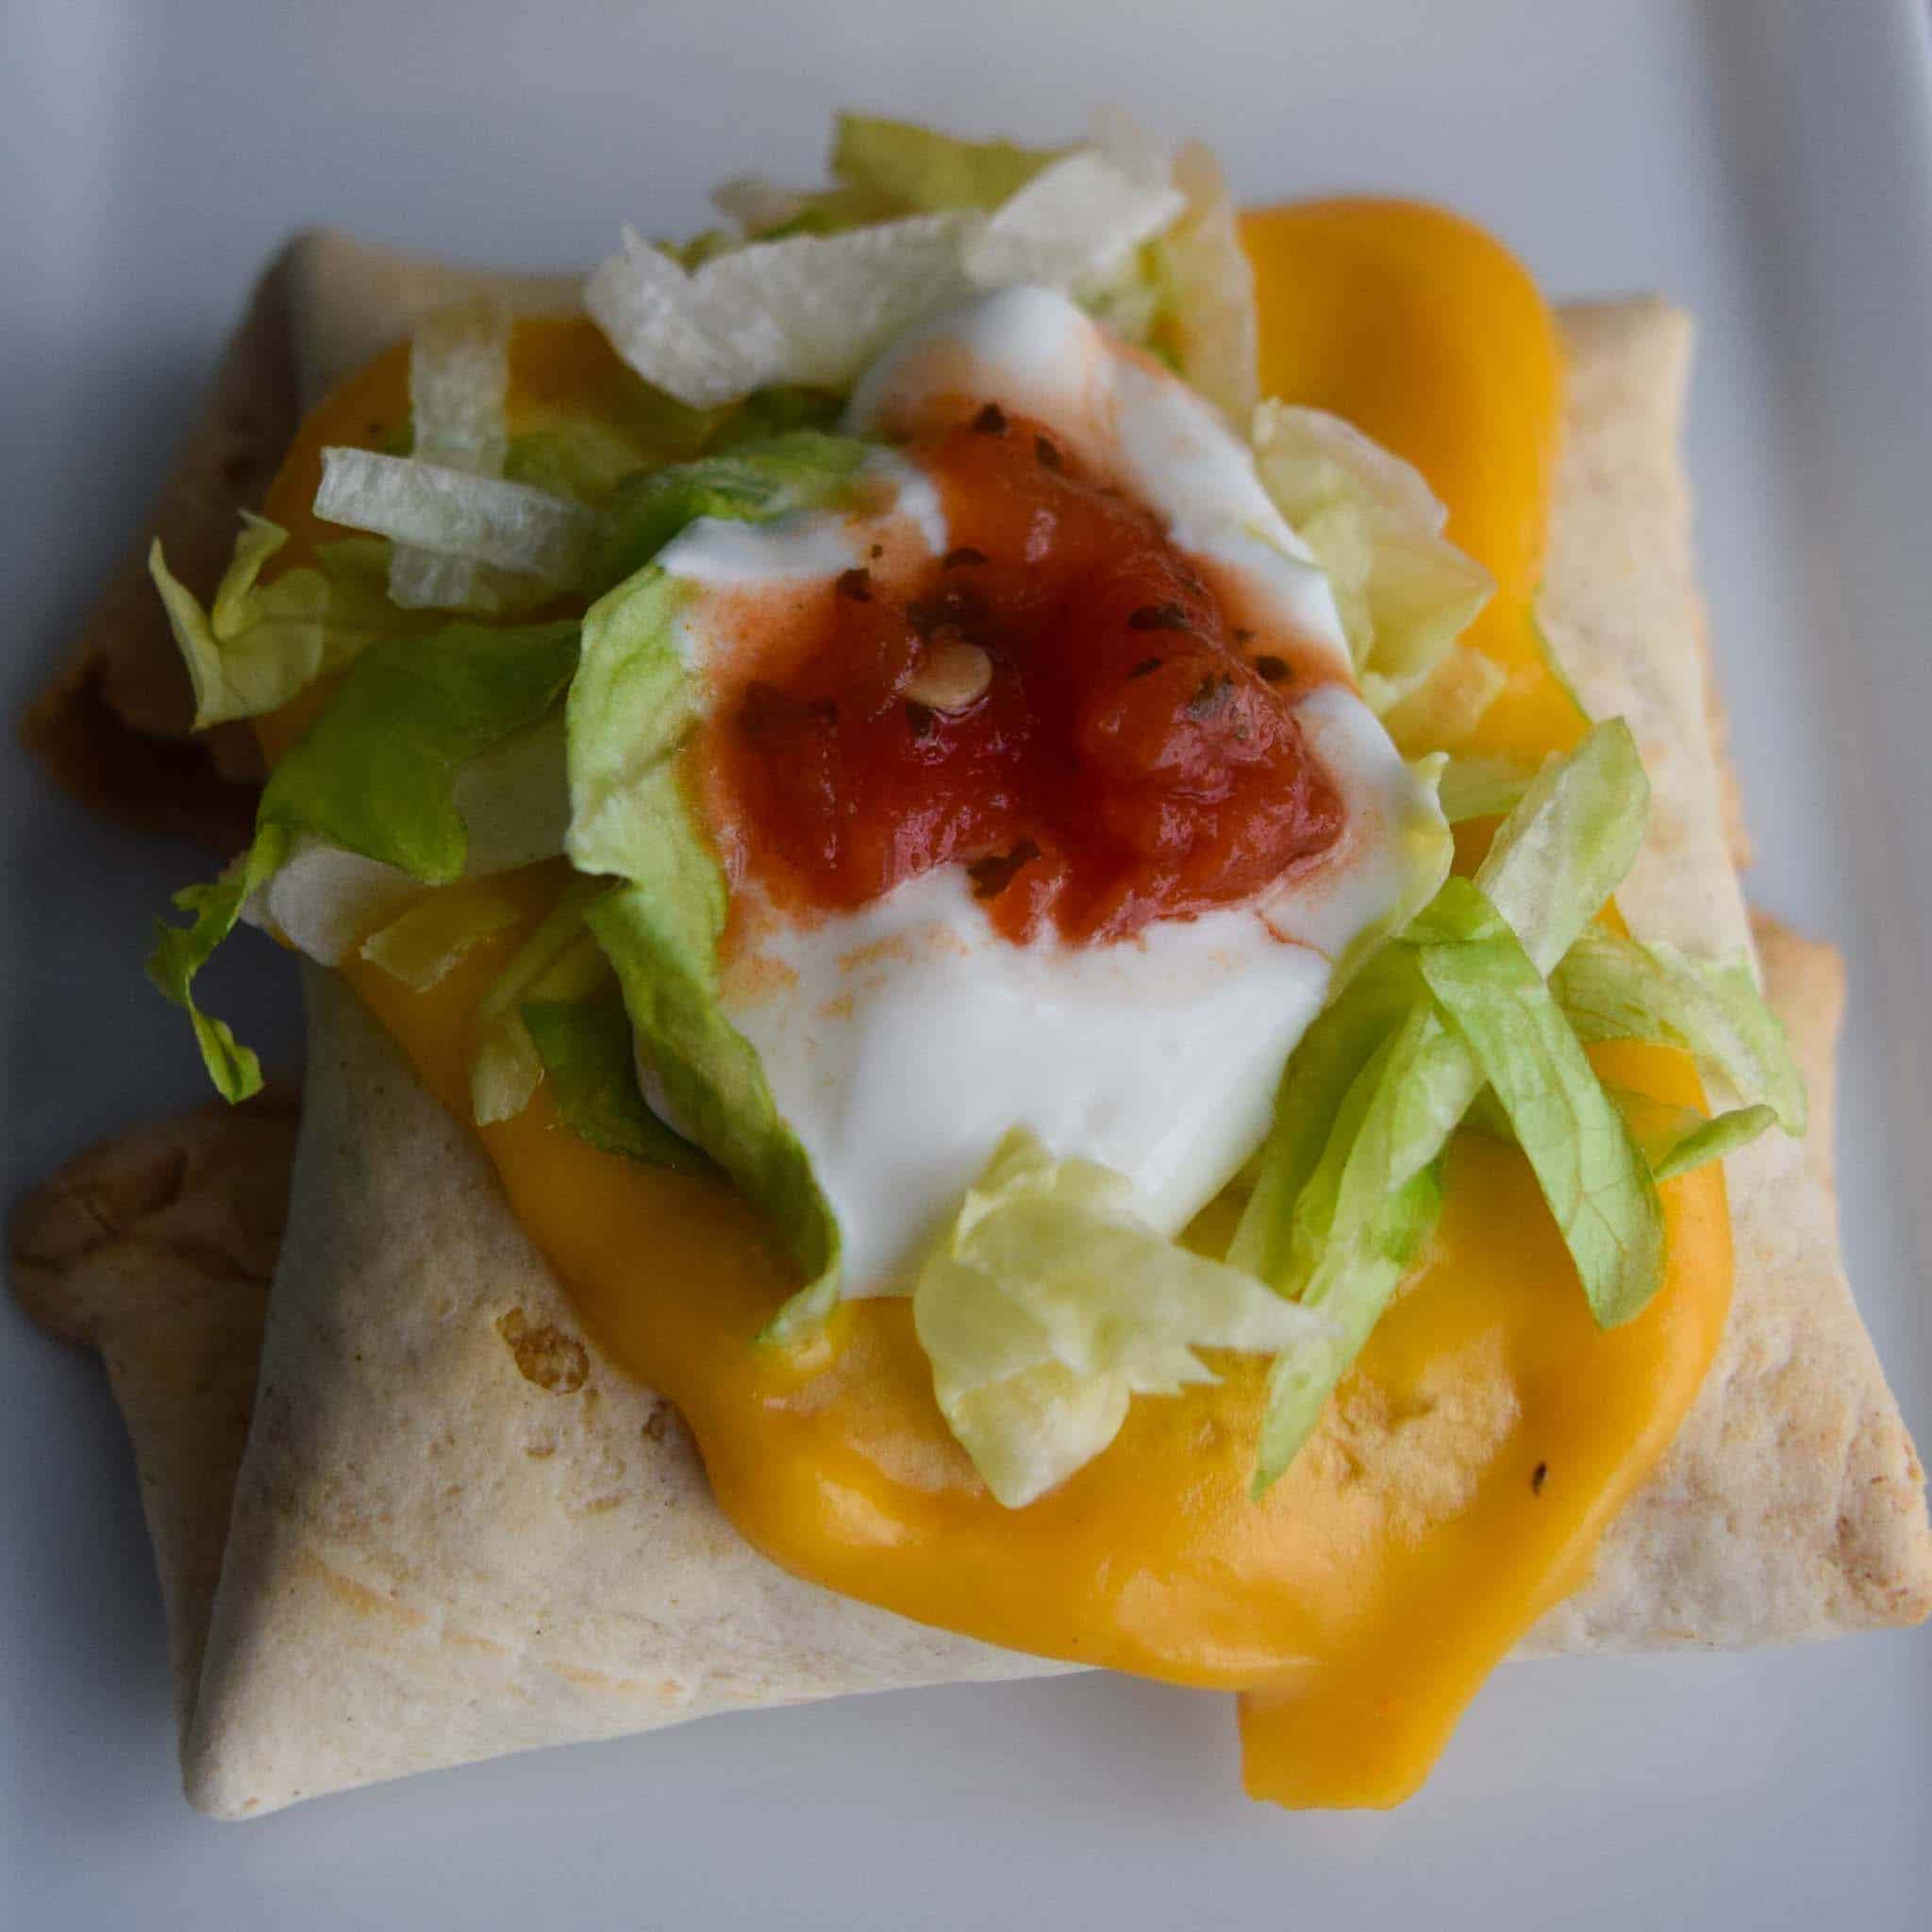 Baked Chimichangas with Guilt-Free Cheesy Sauce topped with lettuce sour cream and salsa close up view